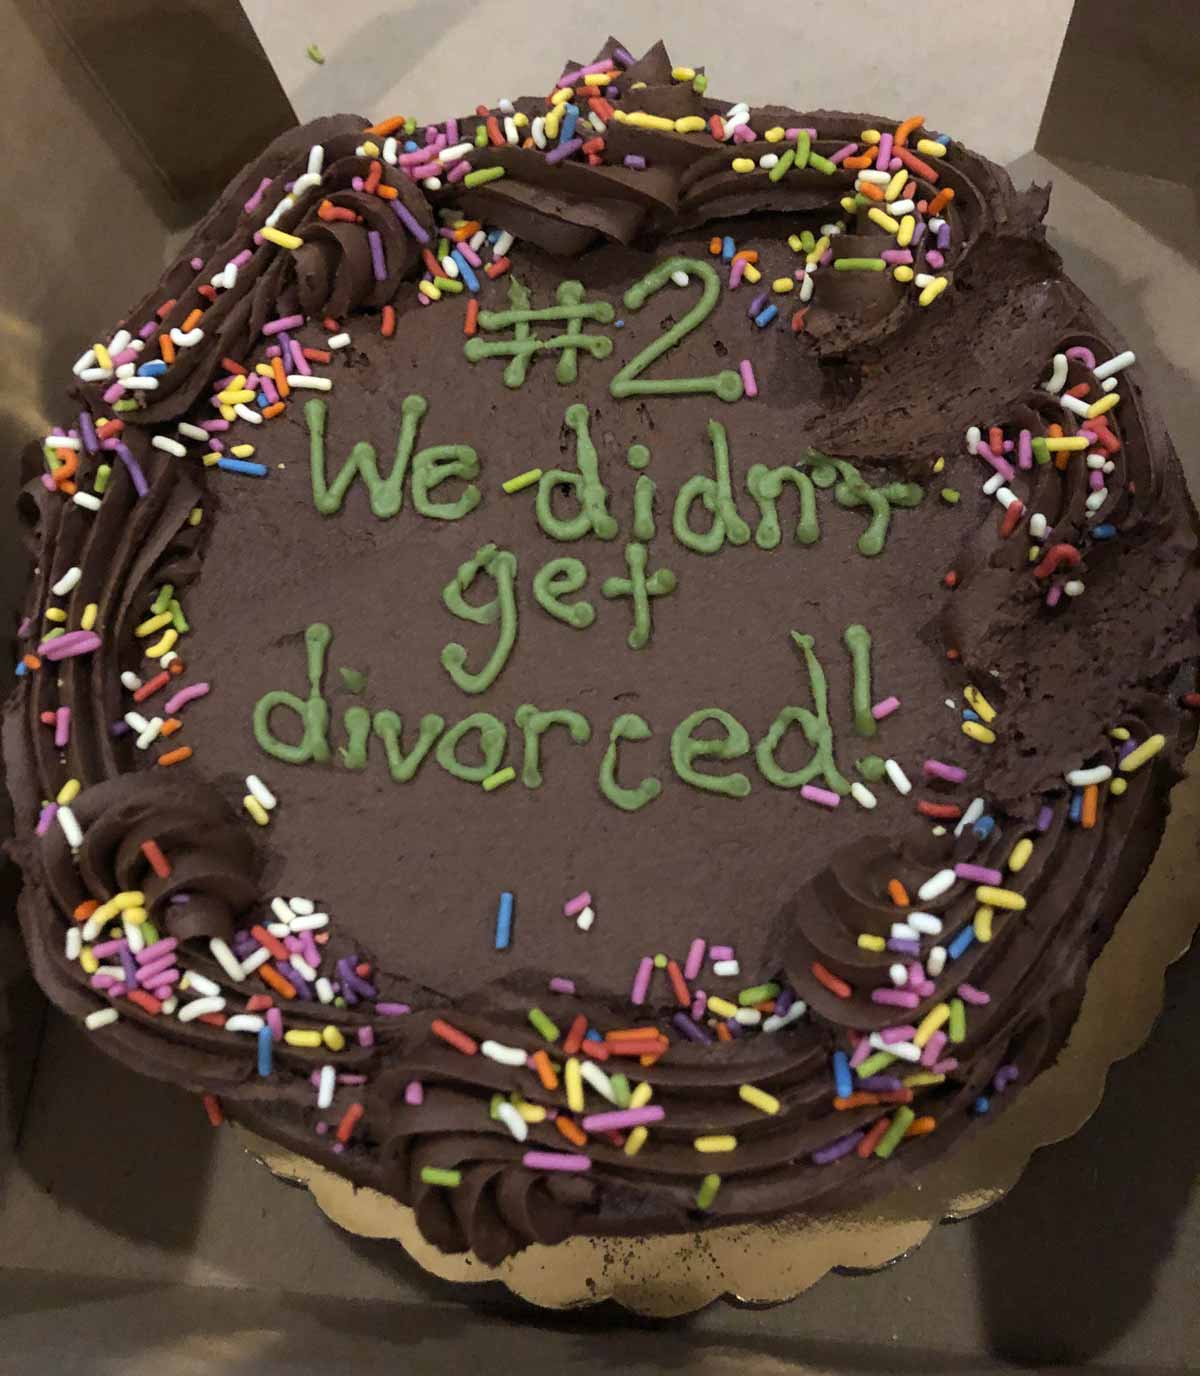 Wife’s interesting choice of words for our anniversary cake!